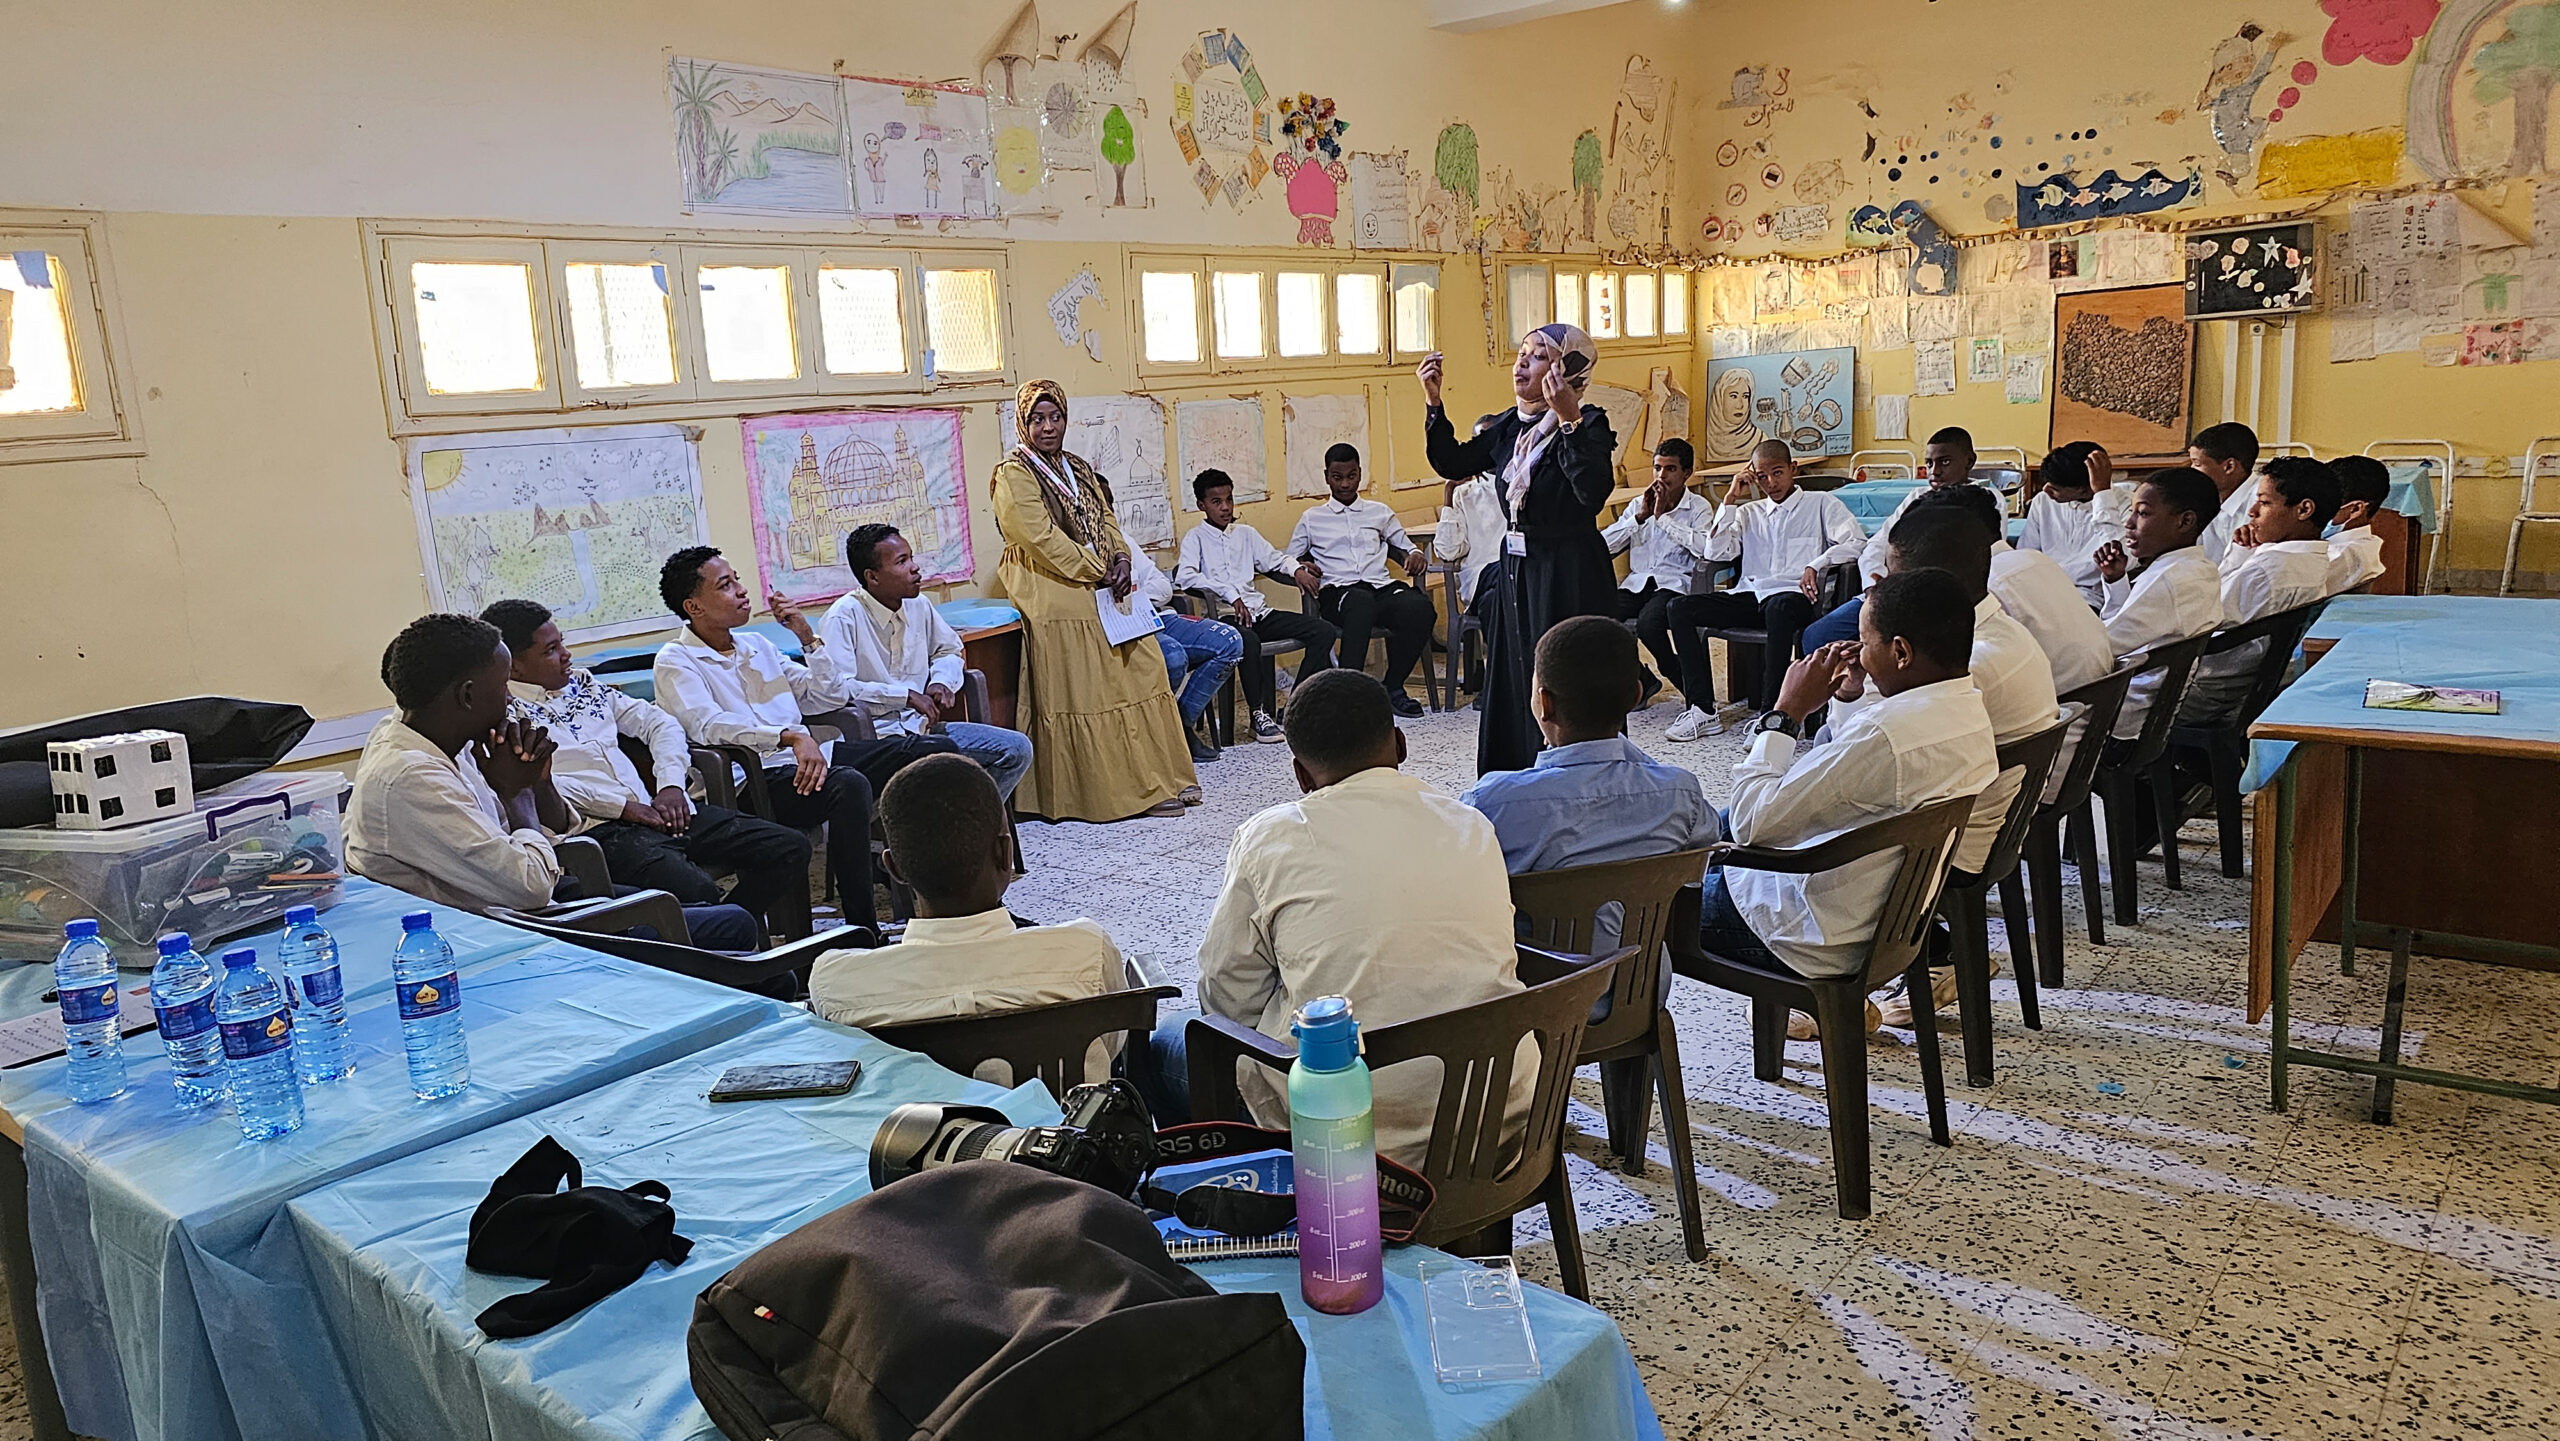 12 November 2023 (GHAT) Libya. Dr. Halima Ramadan, in the middle, engaging with adolescents in Ghat who are actively participate in a Life Skills program session, forging a path of learning, growth, and community. Photo: Abdullah Hussein/ UNICEF Libya